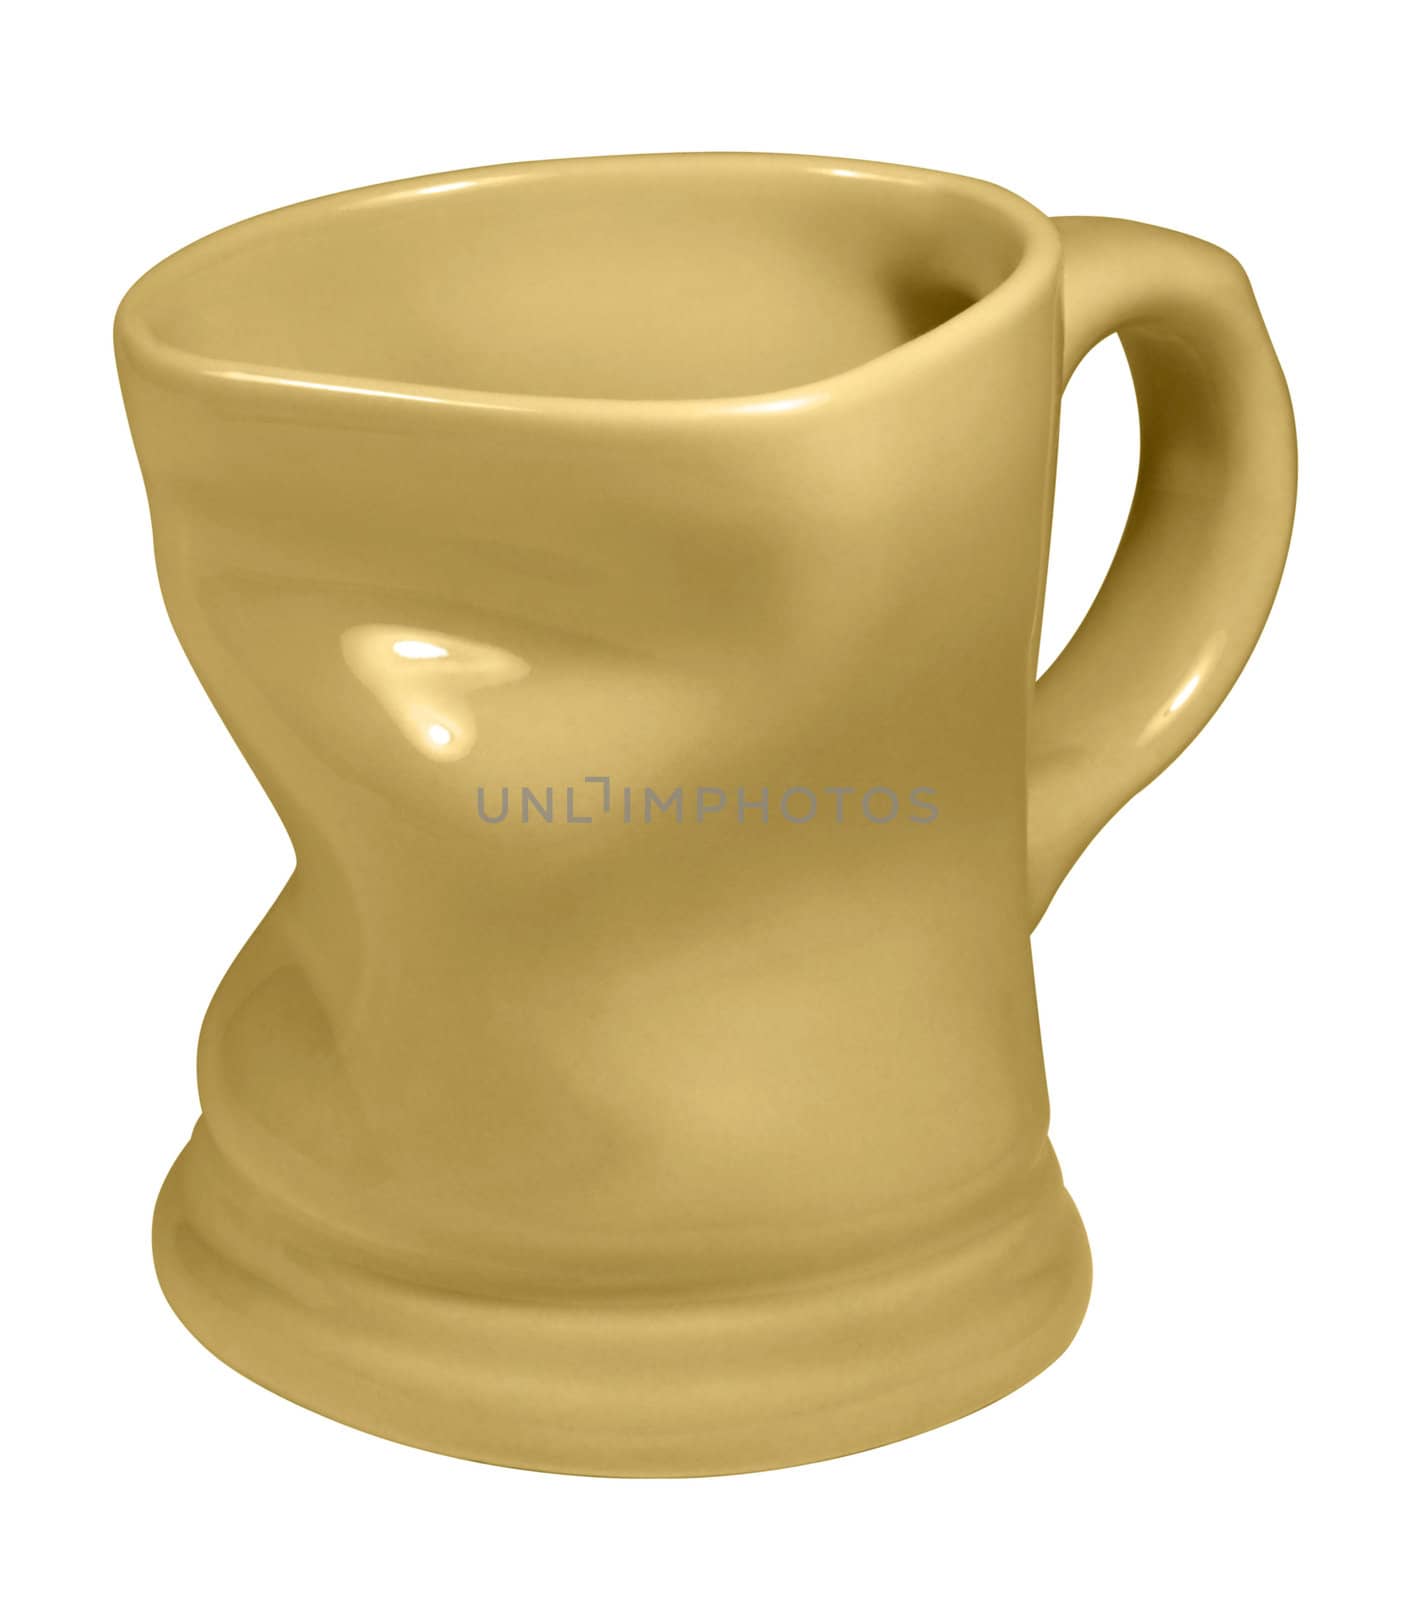 studio photography of a dented yellow porcelain cup isolated on white